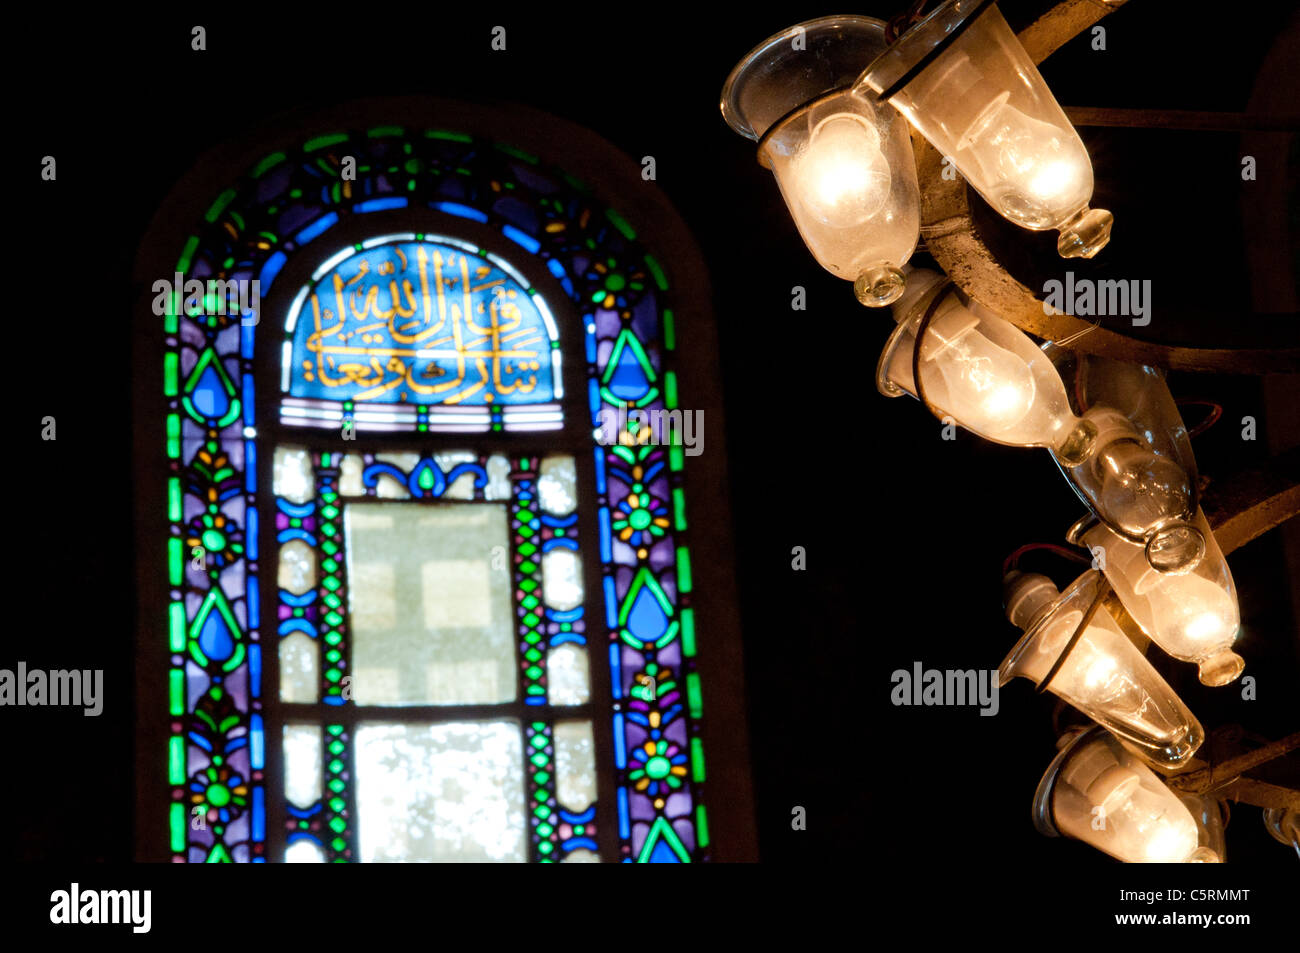 Lightbulbs and a stained glass window, Ayasofya (Hagia Sophia) cathedral and mosque, Istanbul, Turkey Stock Photo